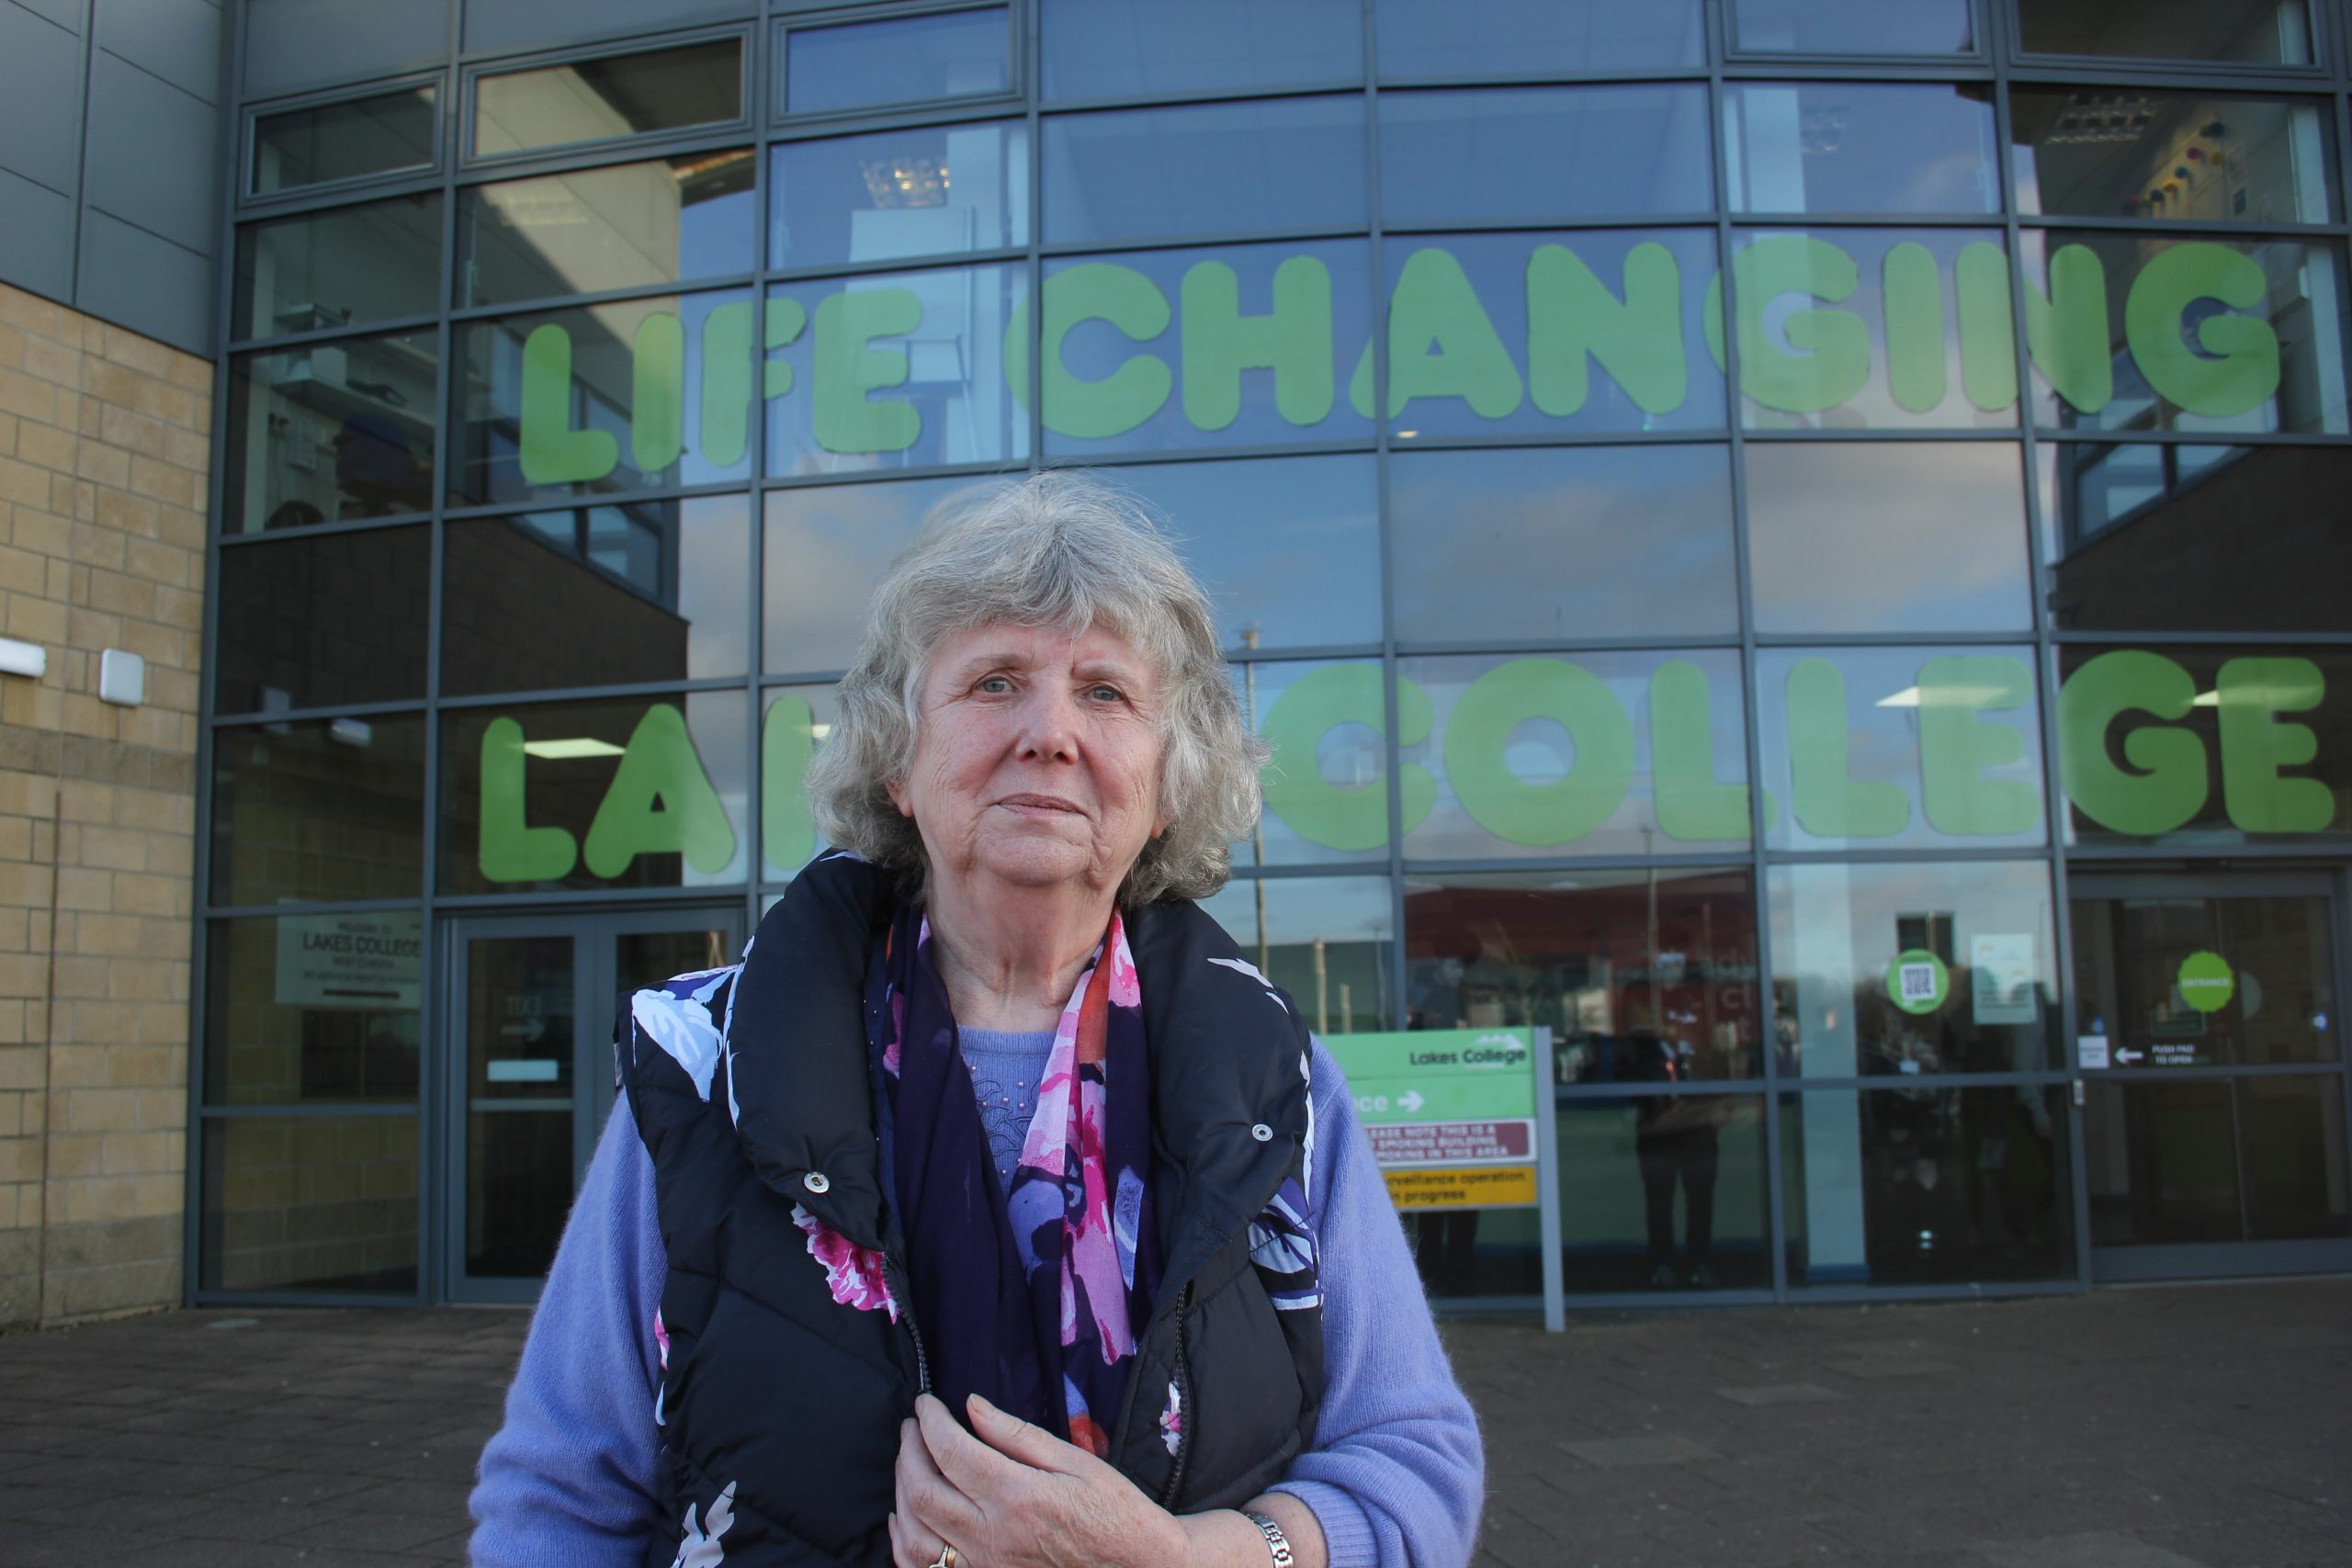 Norma Boyes stands in front of the main Lakes College building